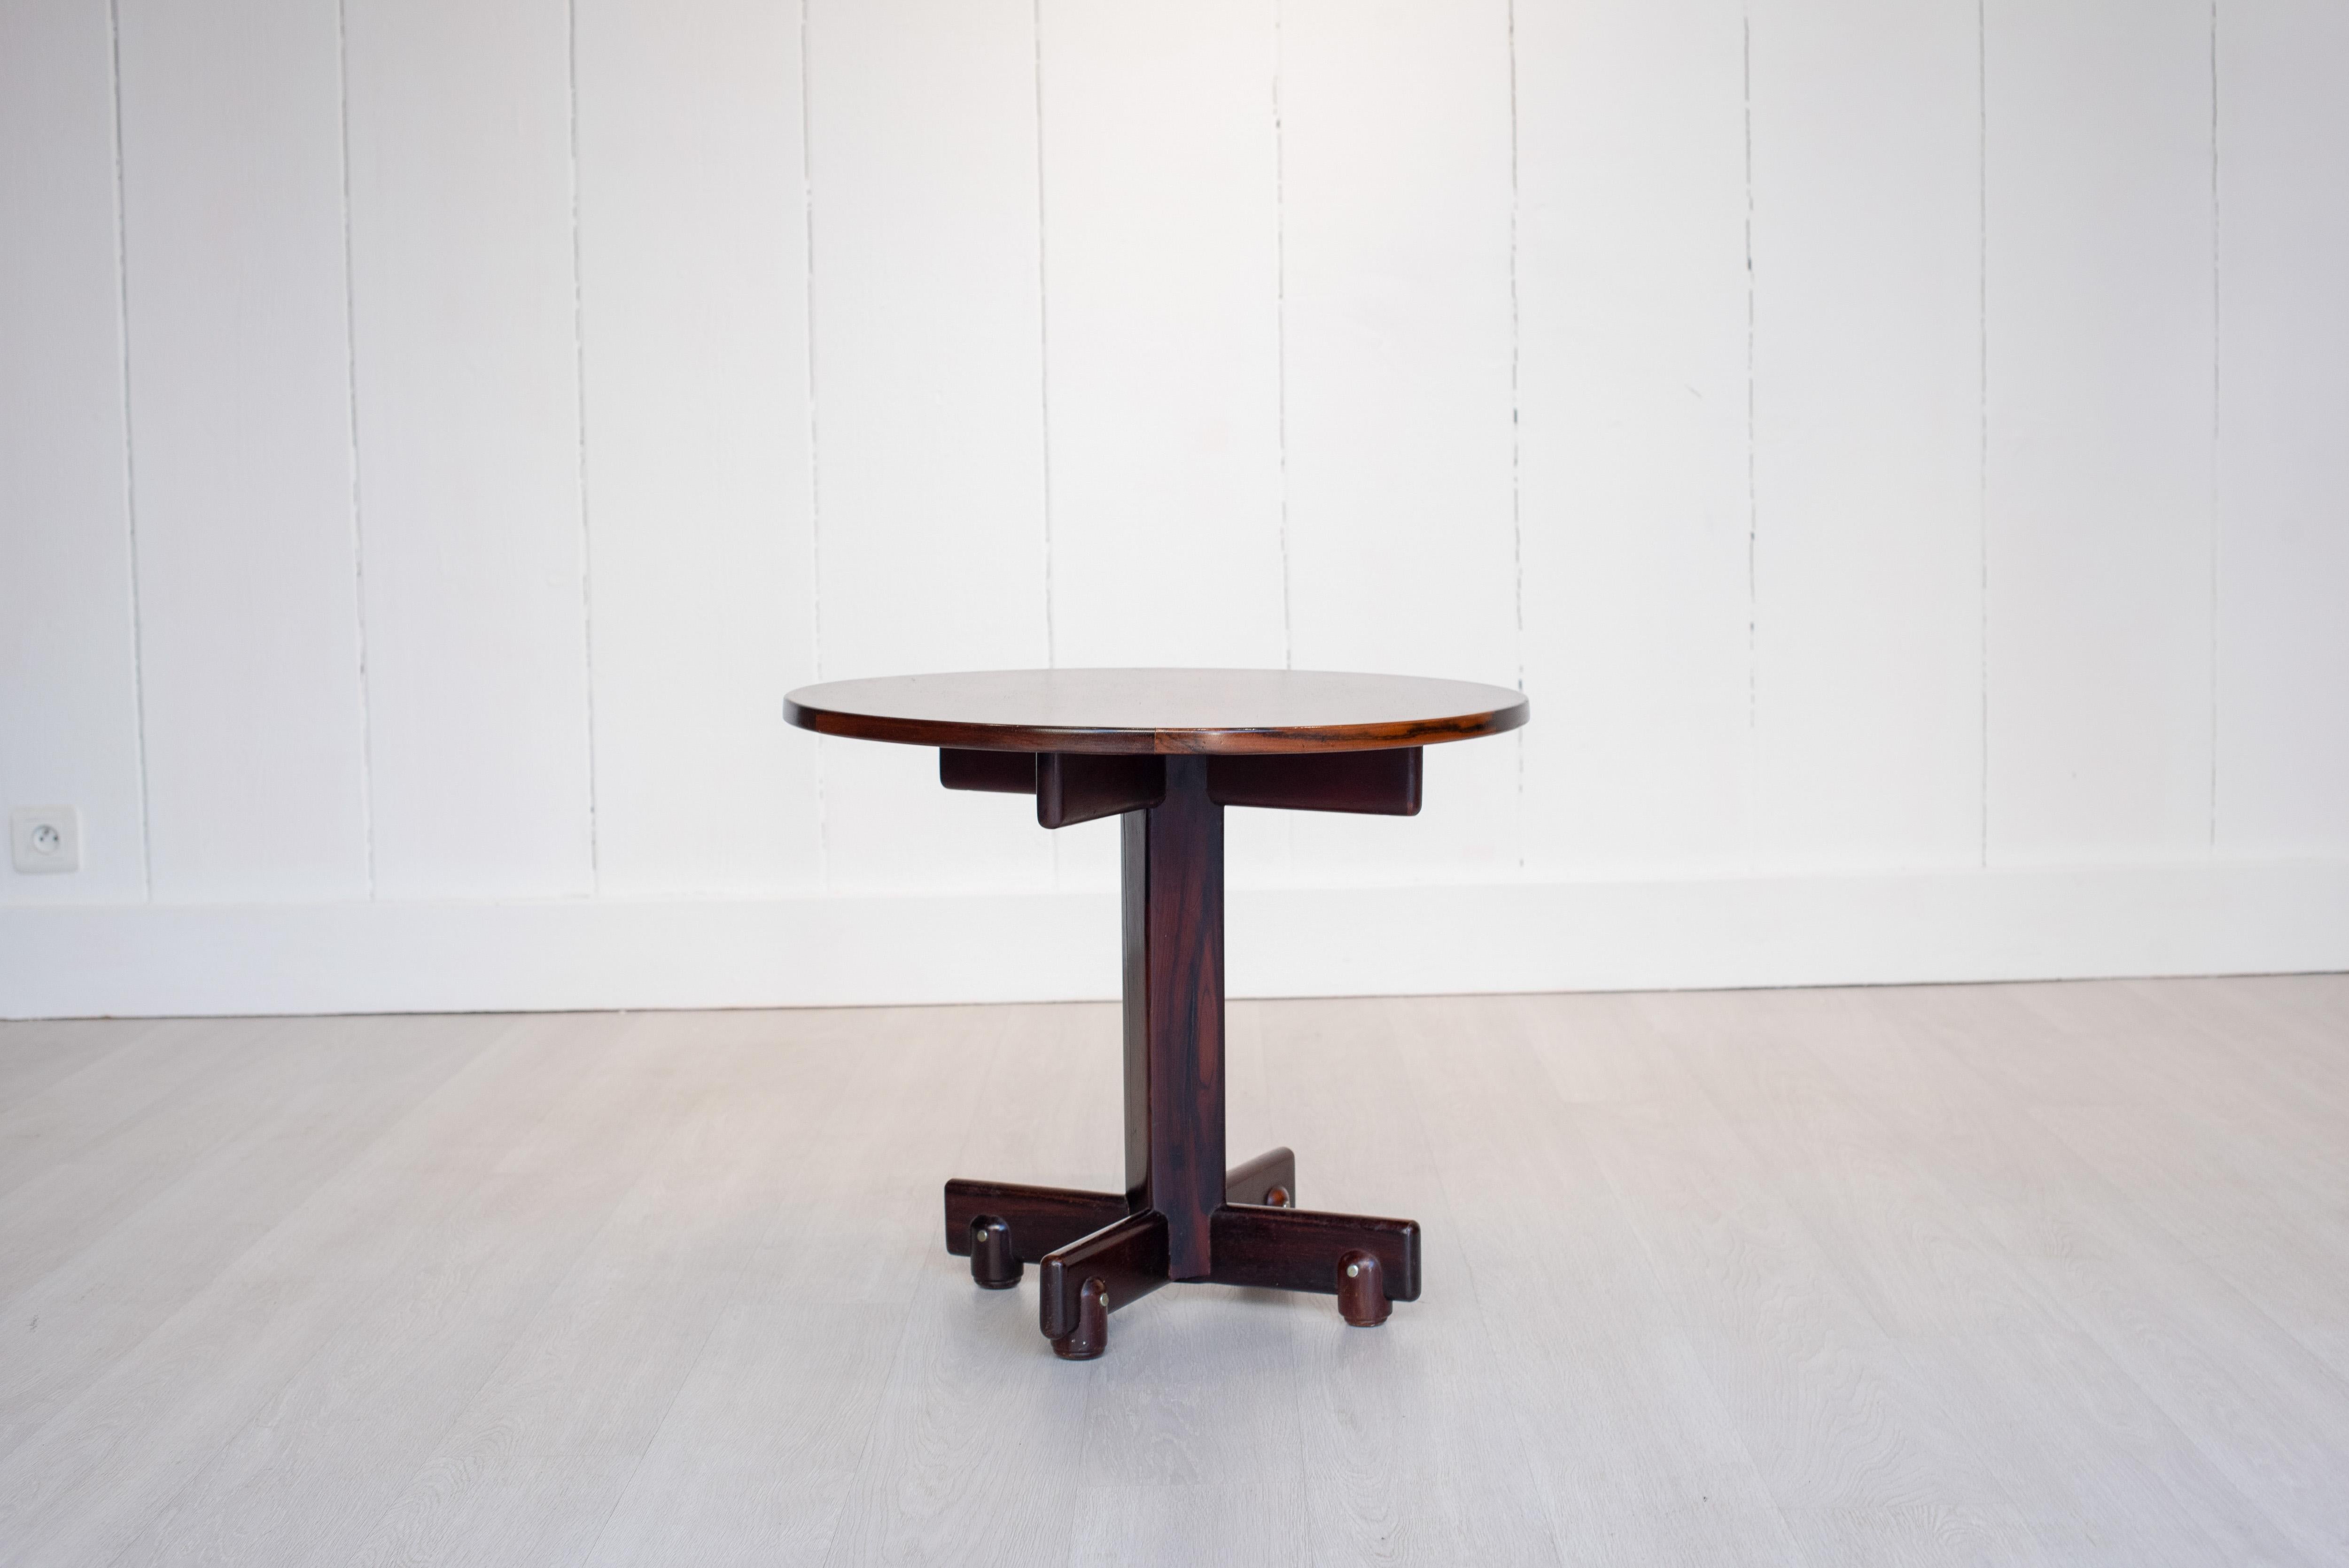 Designed in 1960 by Sergio Rodrigues, this model pedestal table 